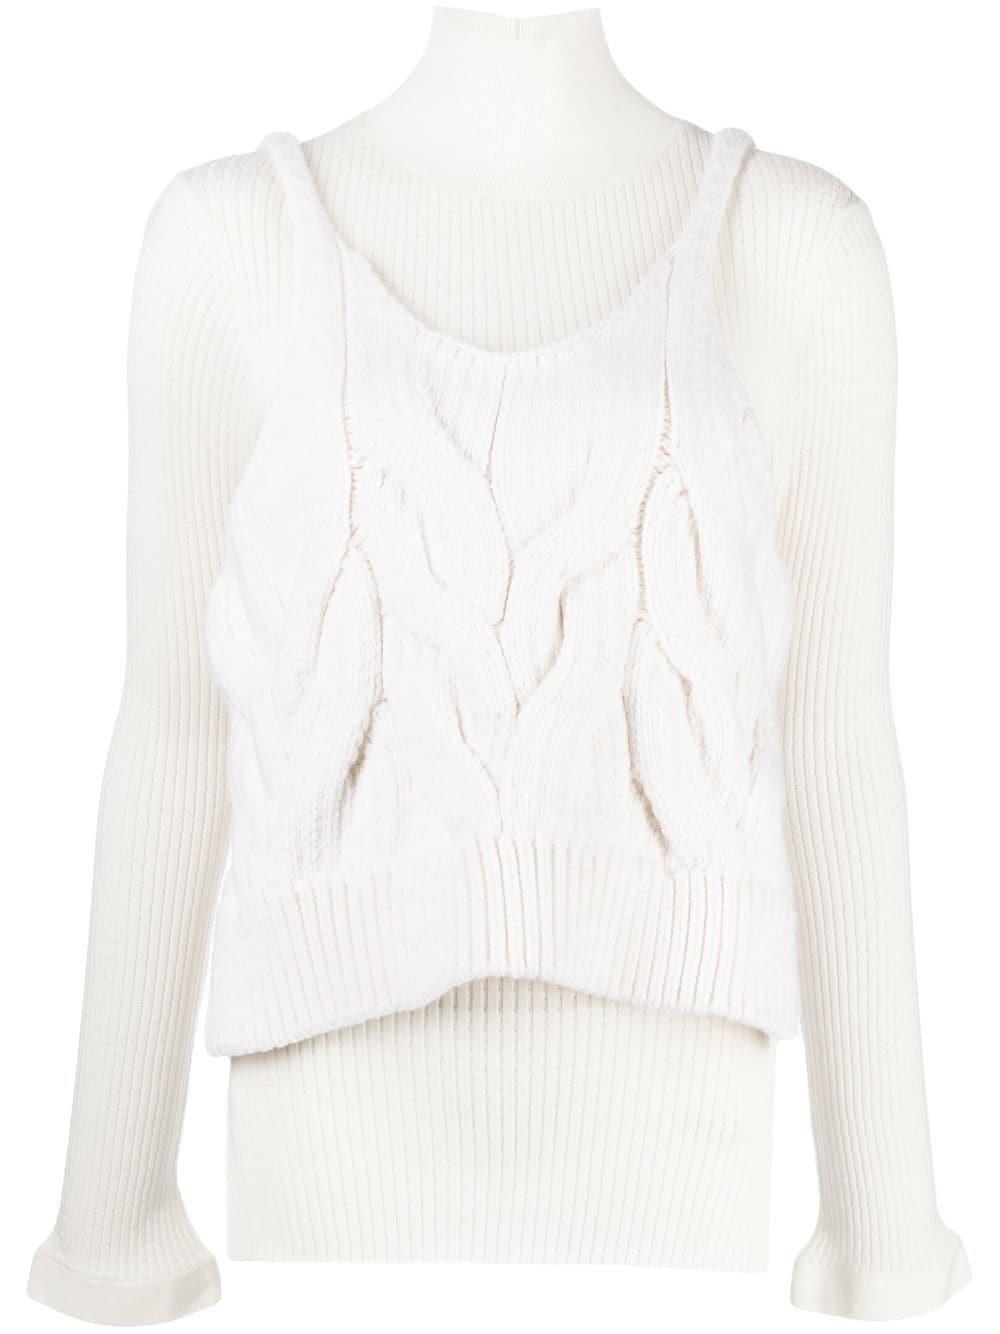 Enfold Layered Cable-knit Top in White | Lyst